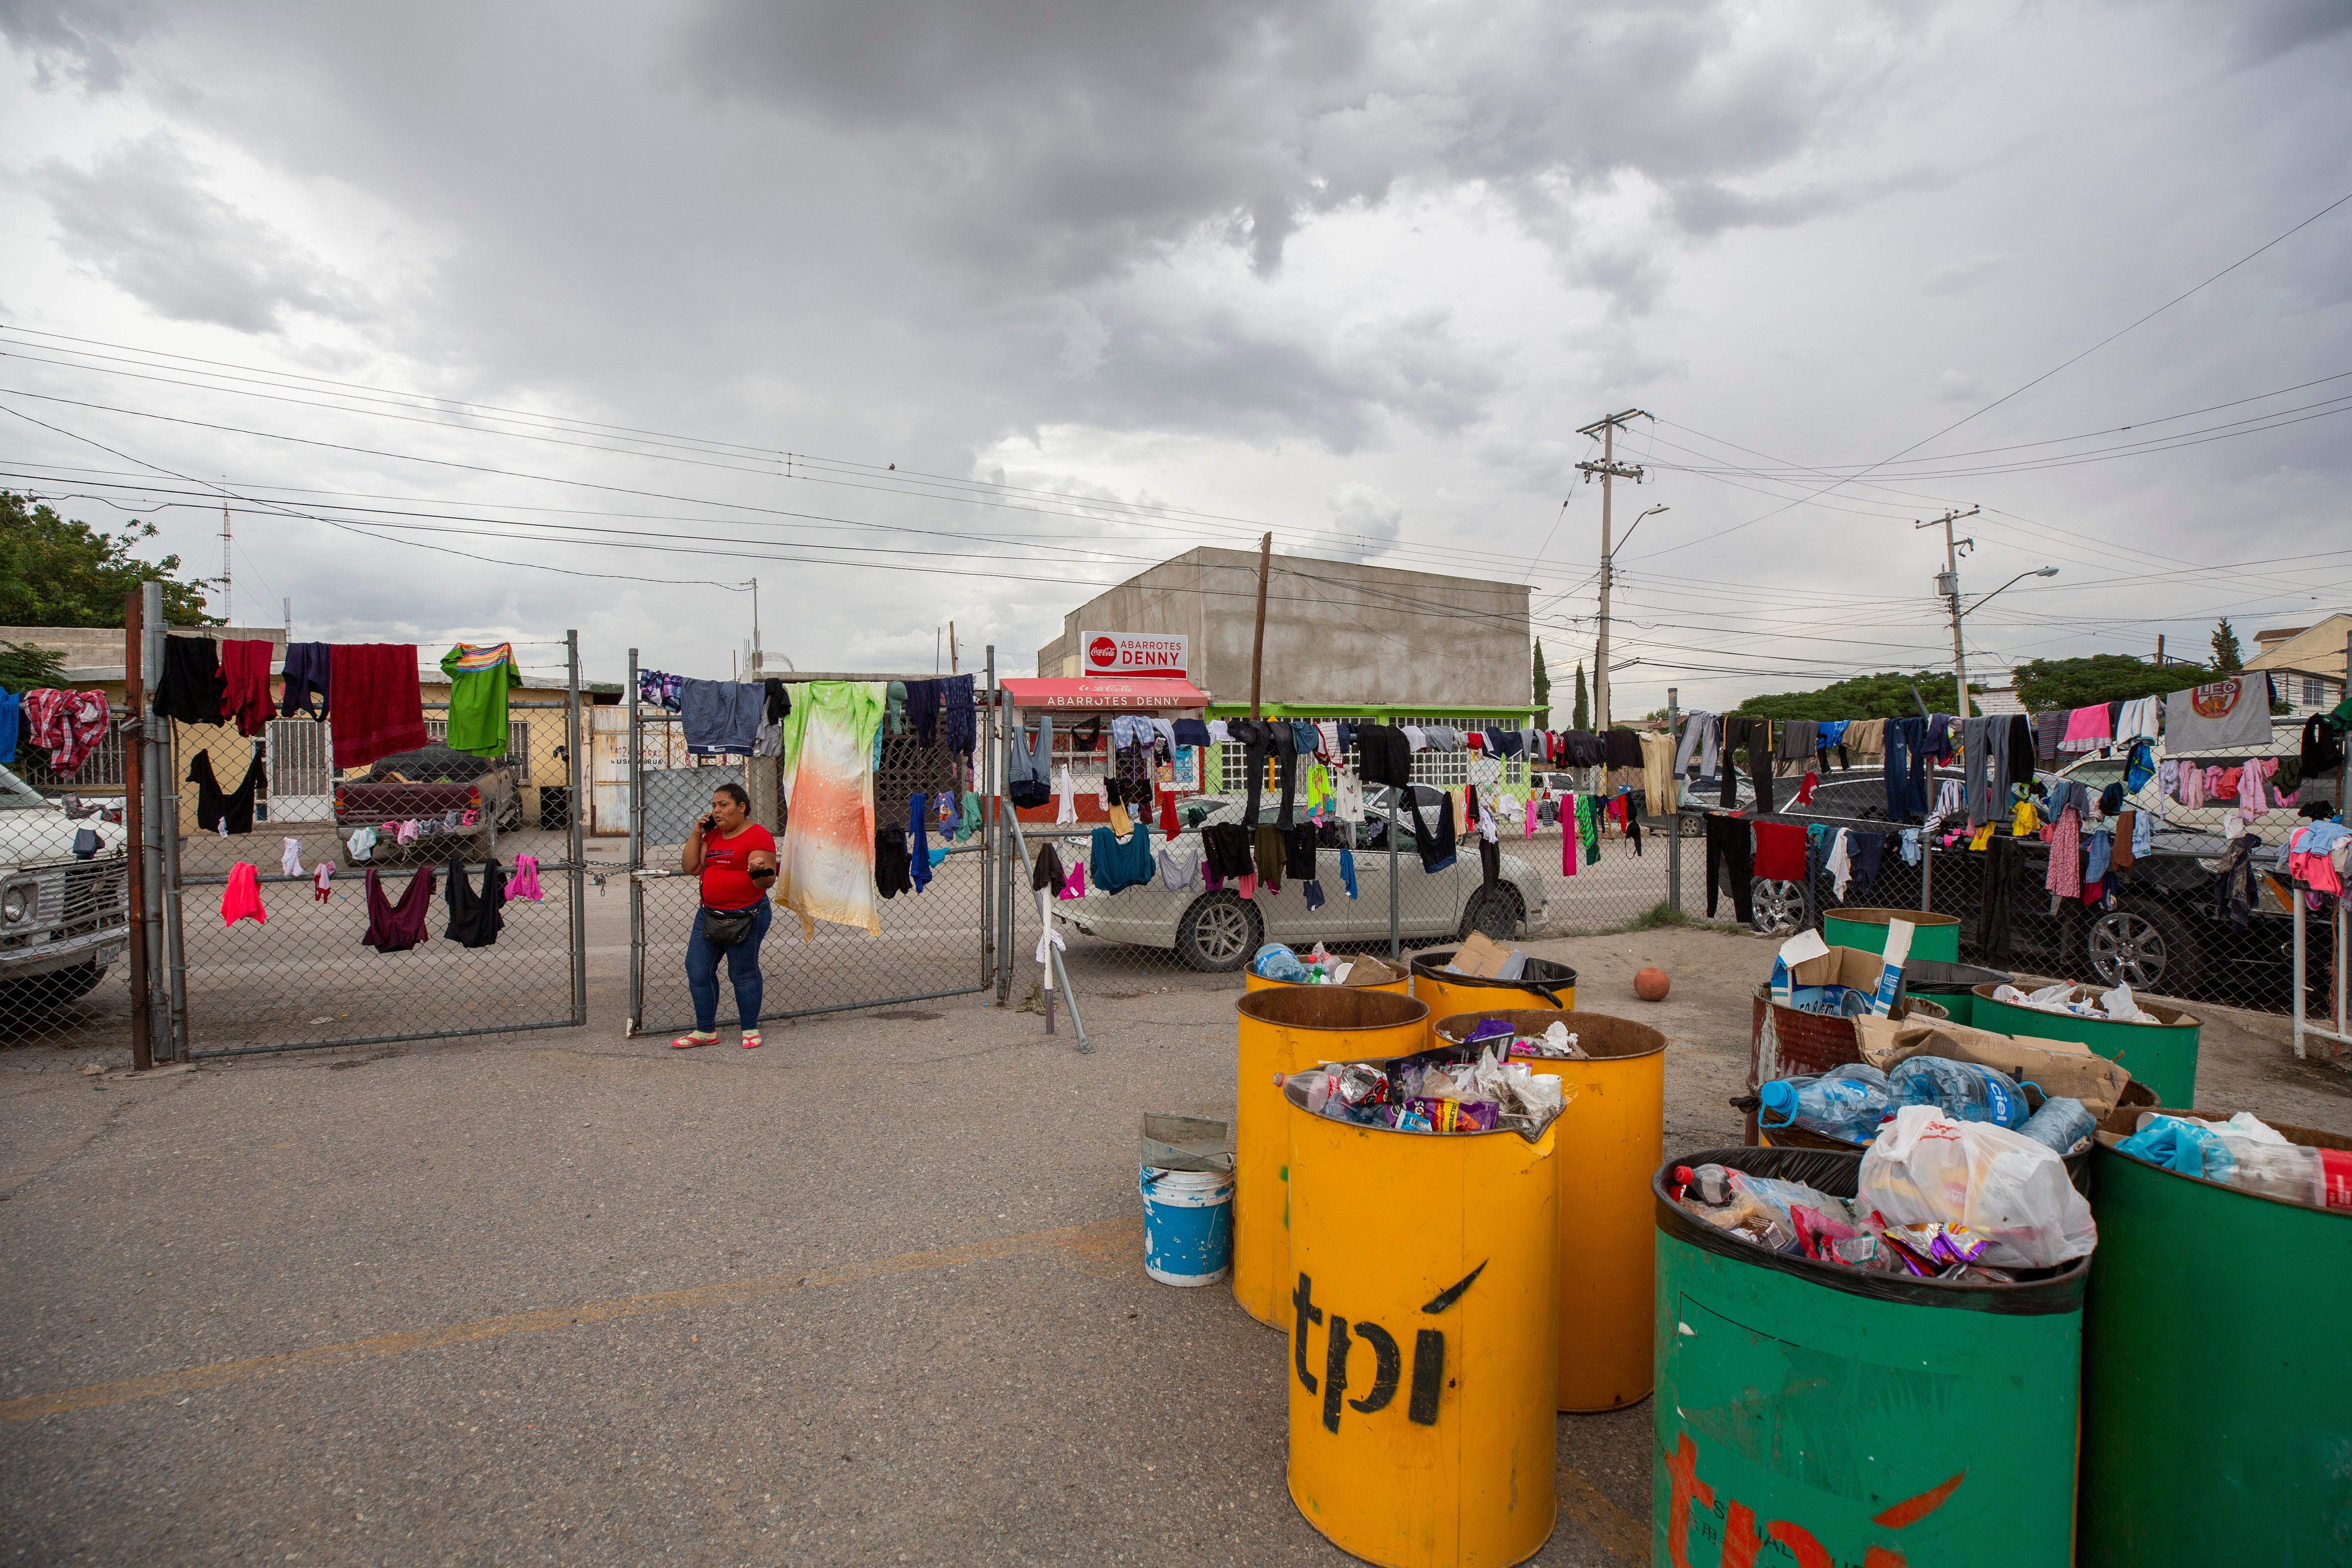 Bins containing trash and a fence used for drying clothing are seen at the Enrique "Kiki" Romero shelter in Juarez on Monday as more than 300 migrants, many of them farmworkers fleeing cartel violence, make use of the migrant shelter.